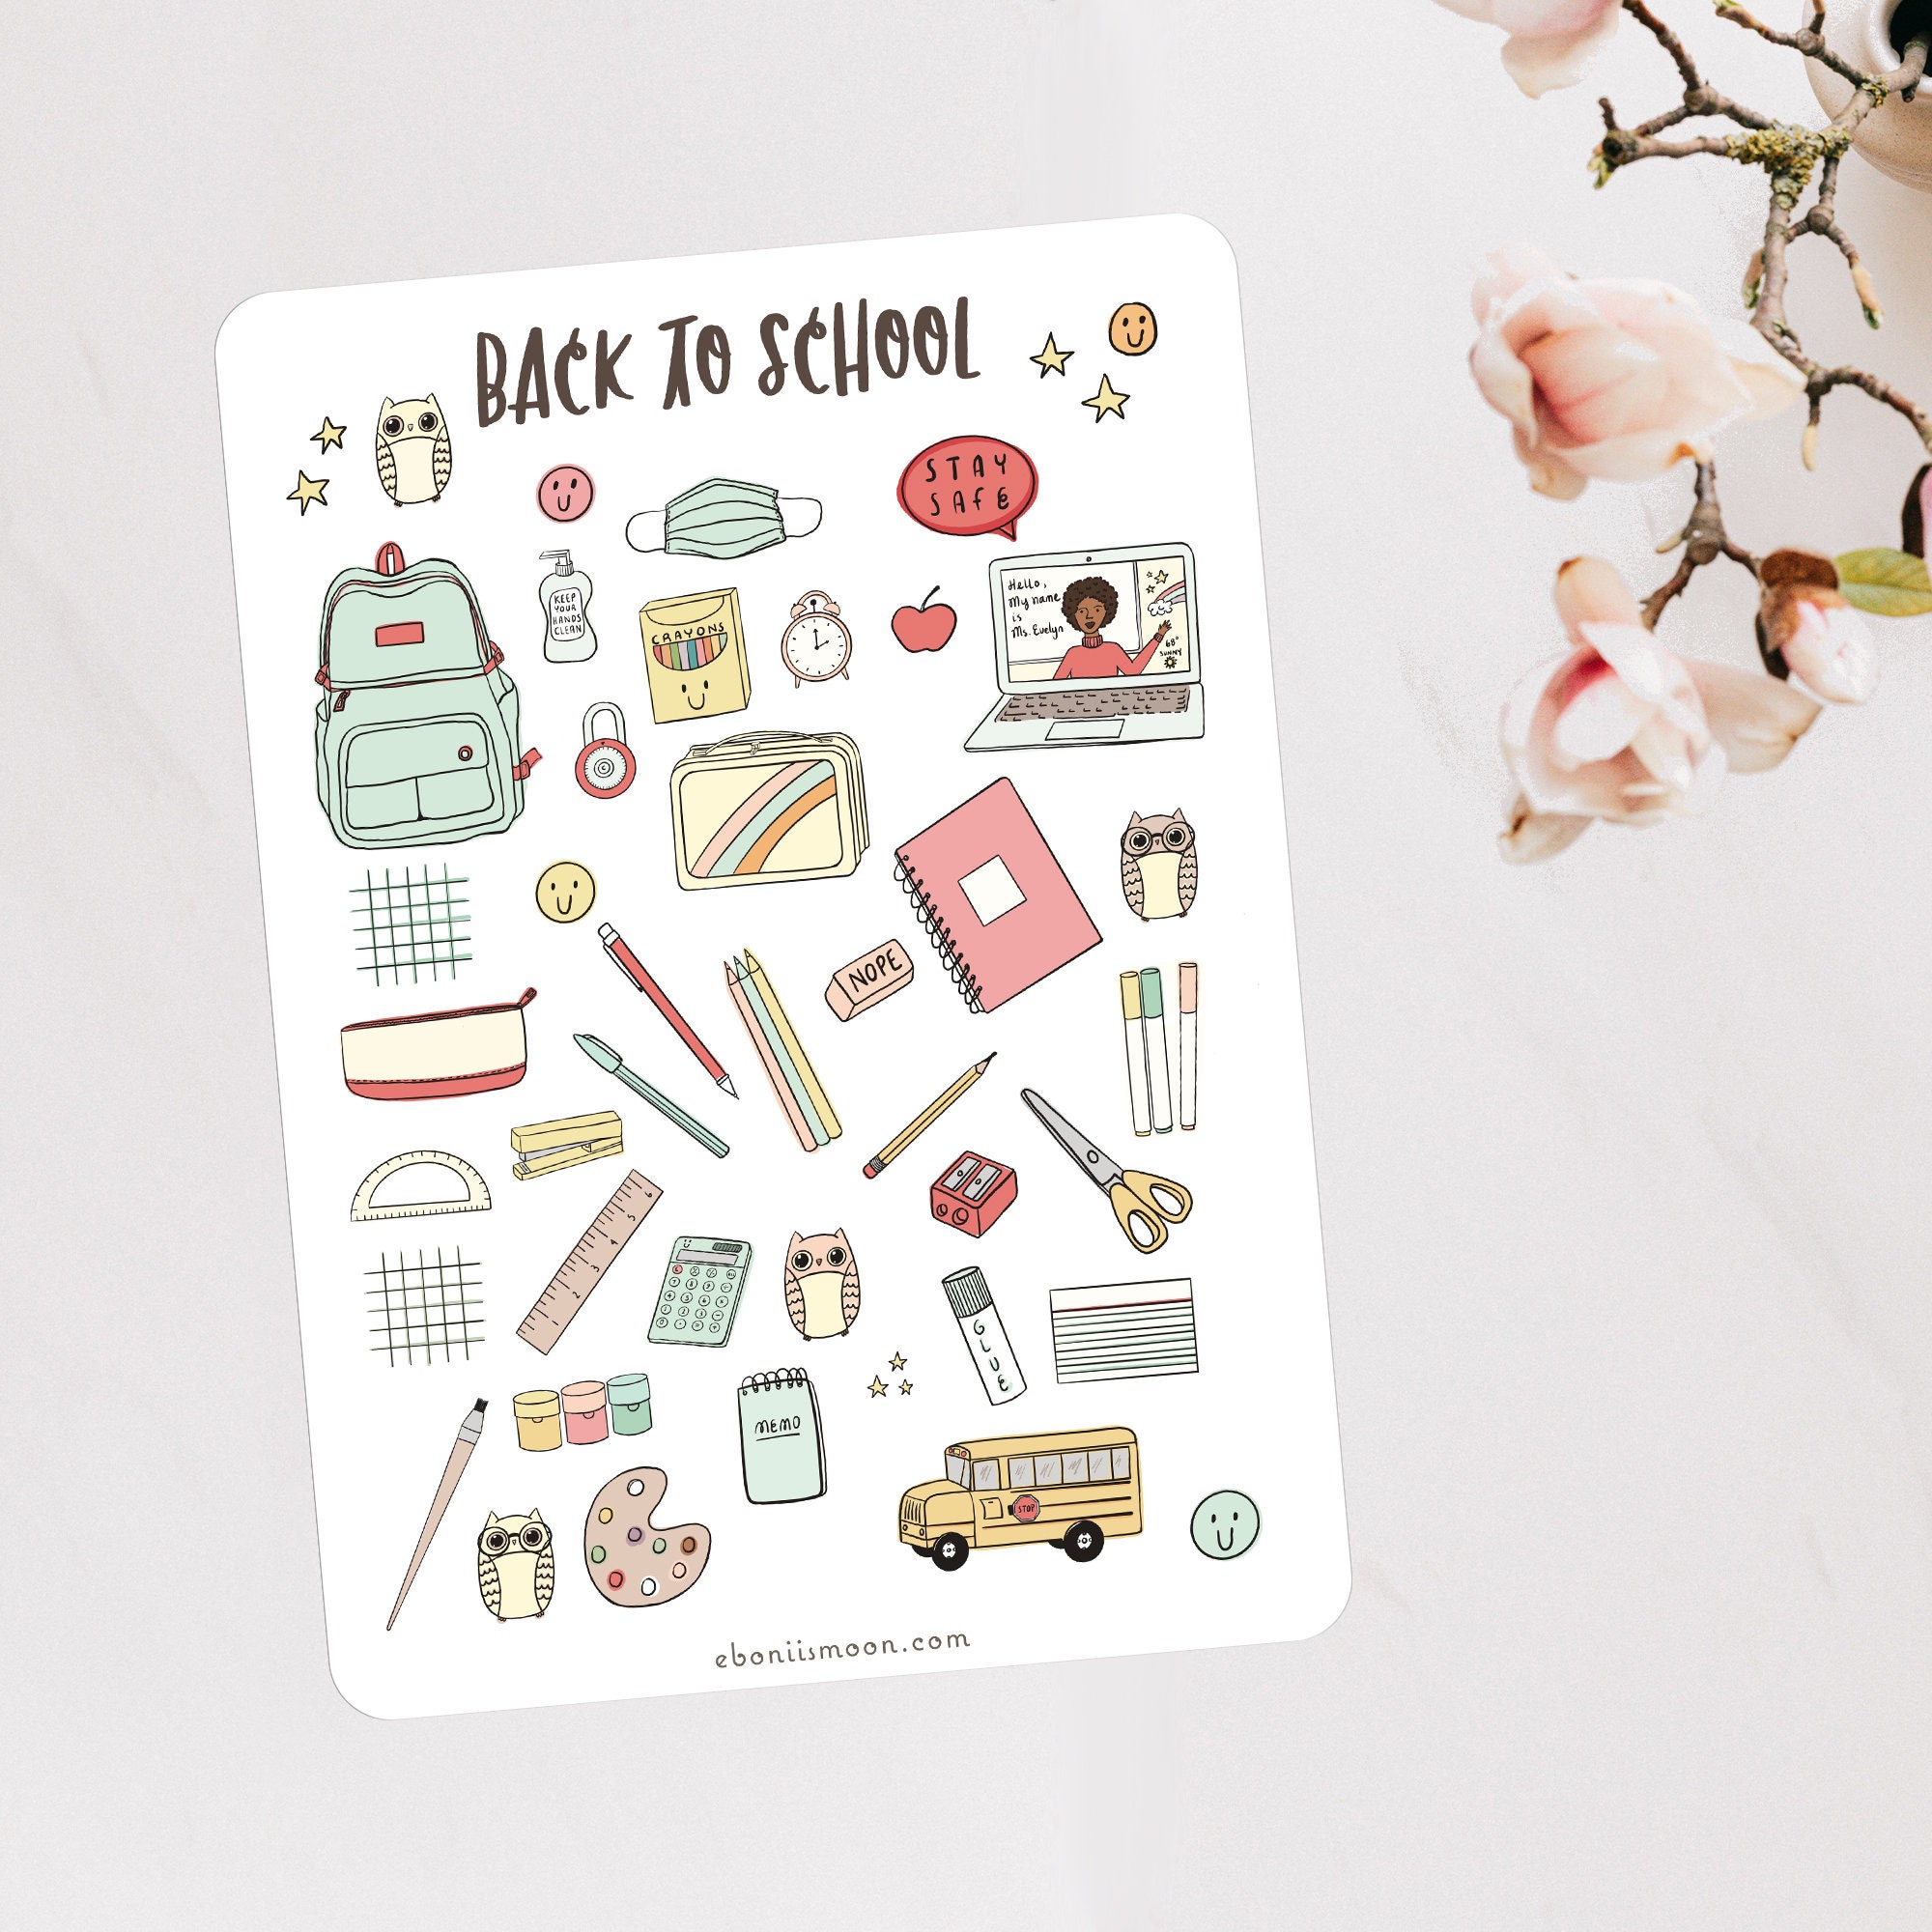 Back to School Supplies, 50pcs First Day of School Aesthetic